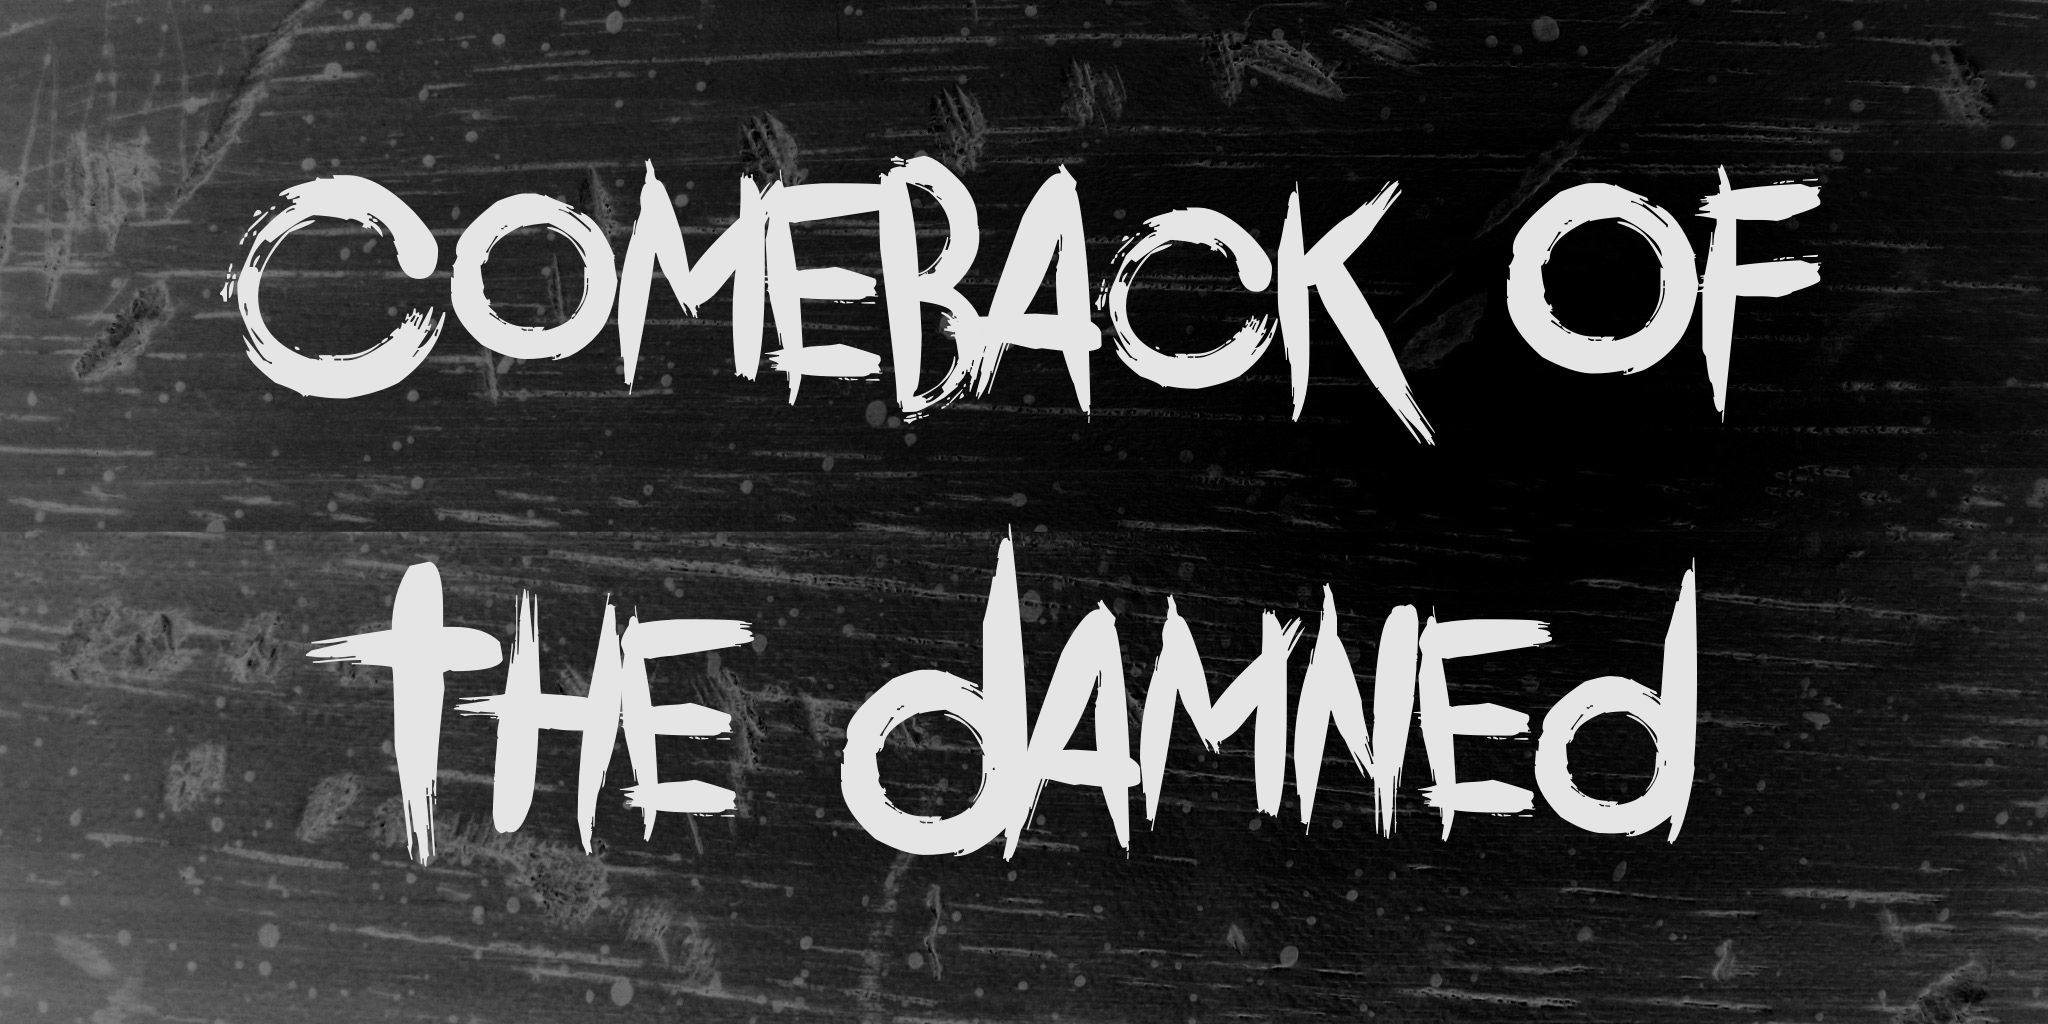 Comeback Of The Damned